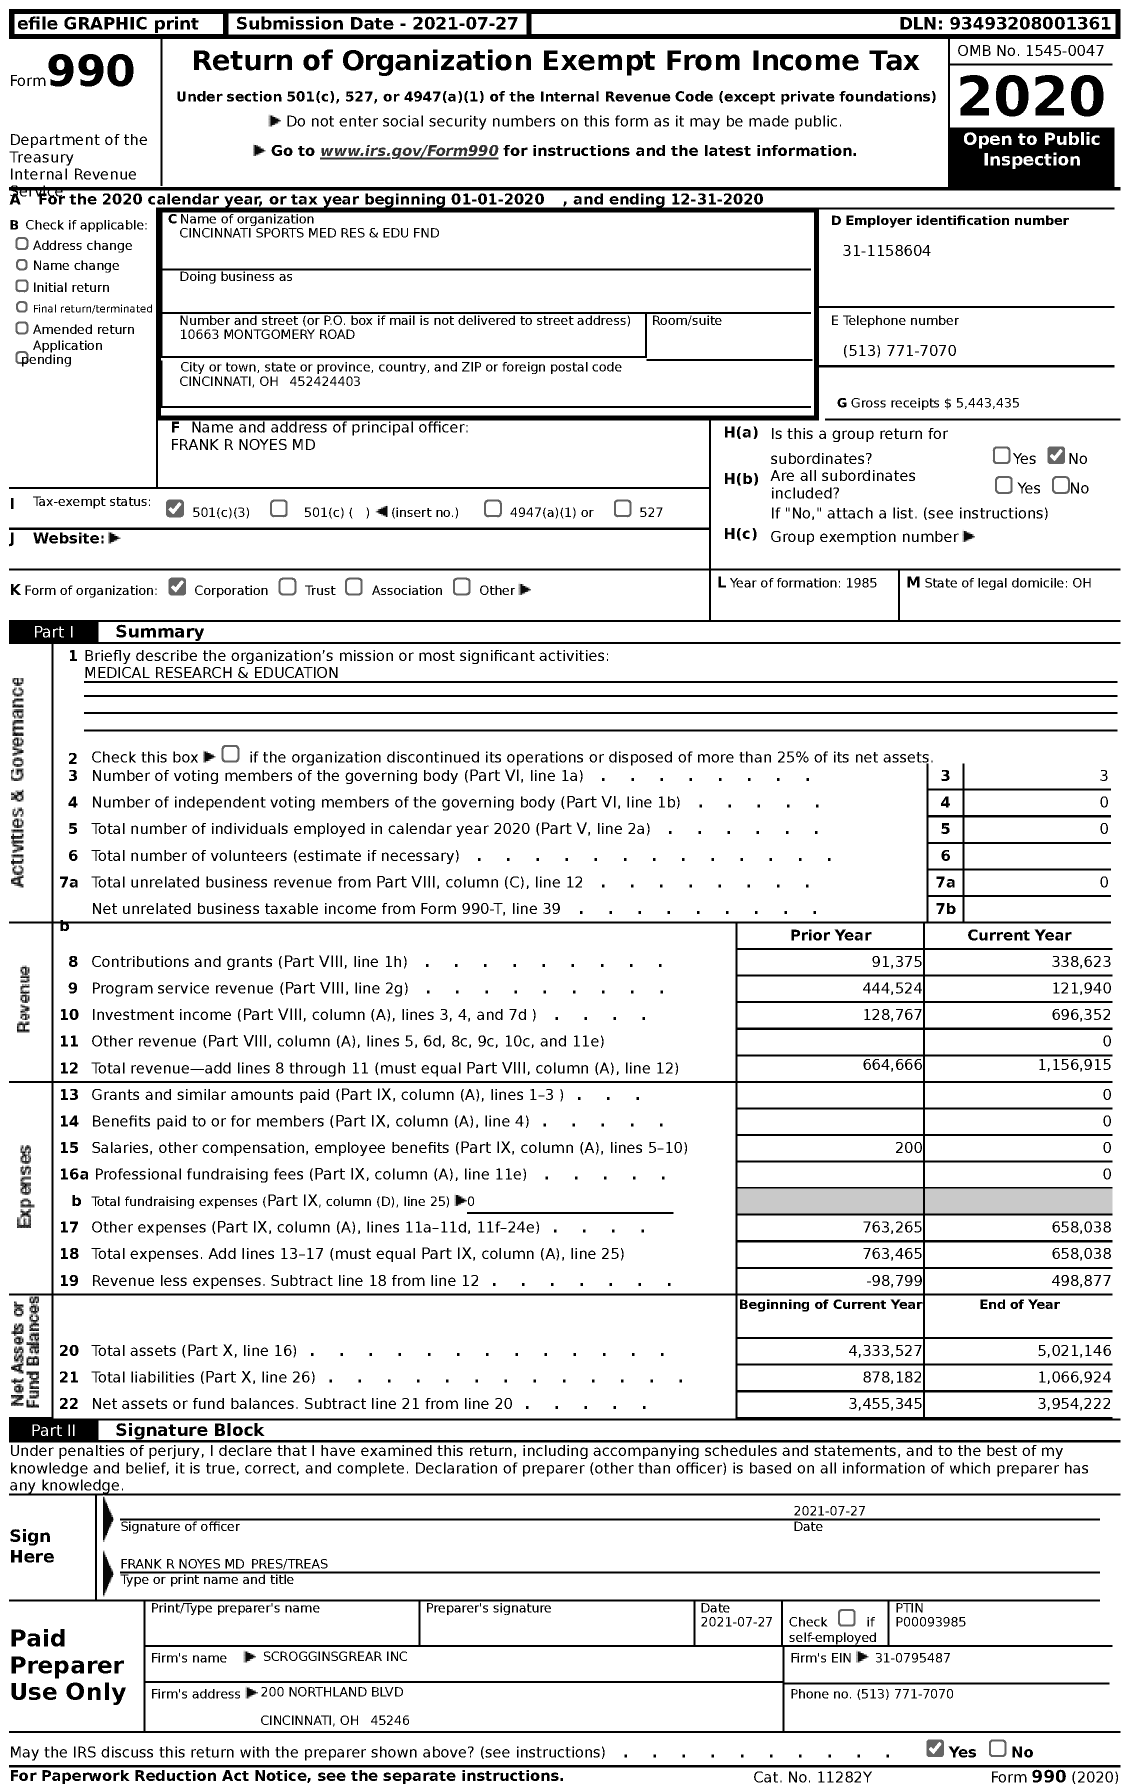 Image of first page of 2020 Form 990 for Cincinnati Sports Med Res and Edu FND